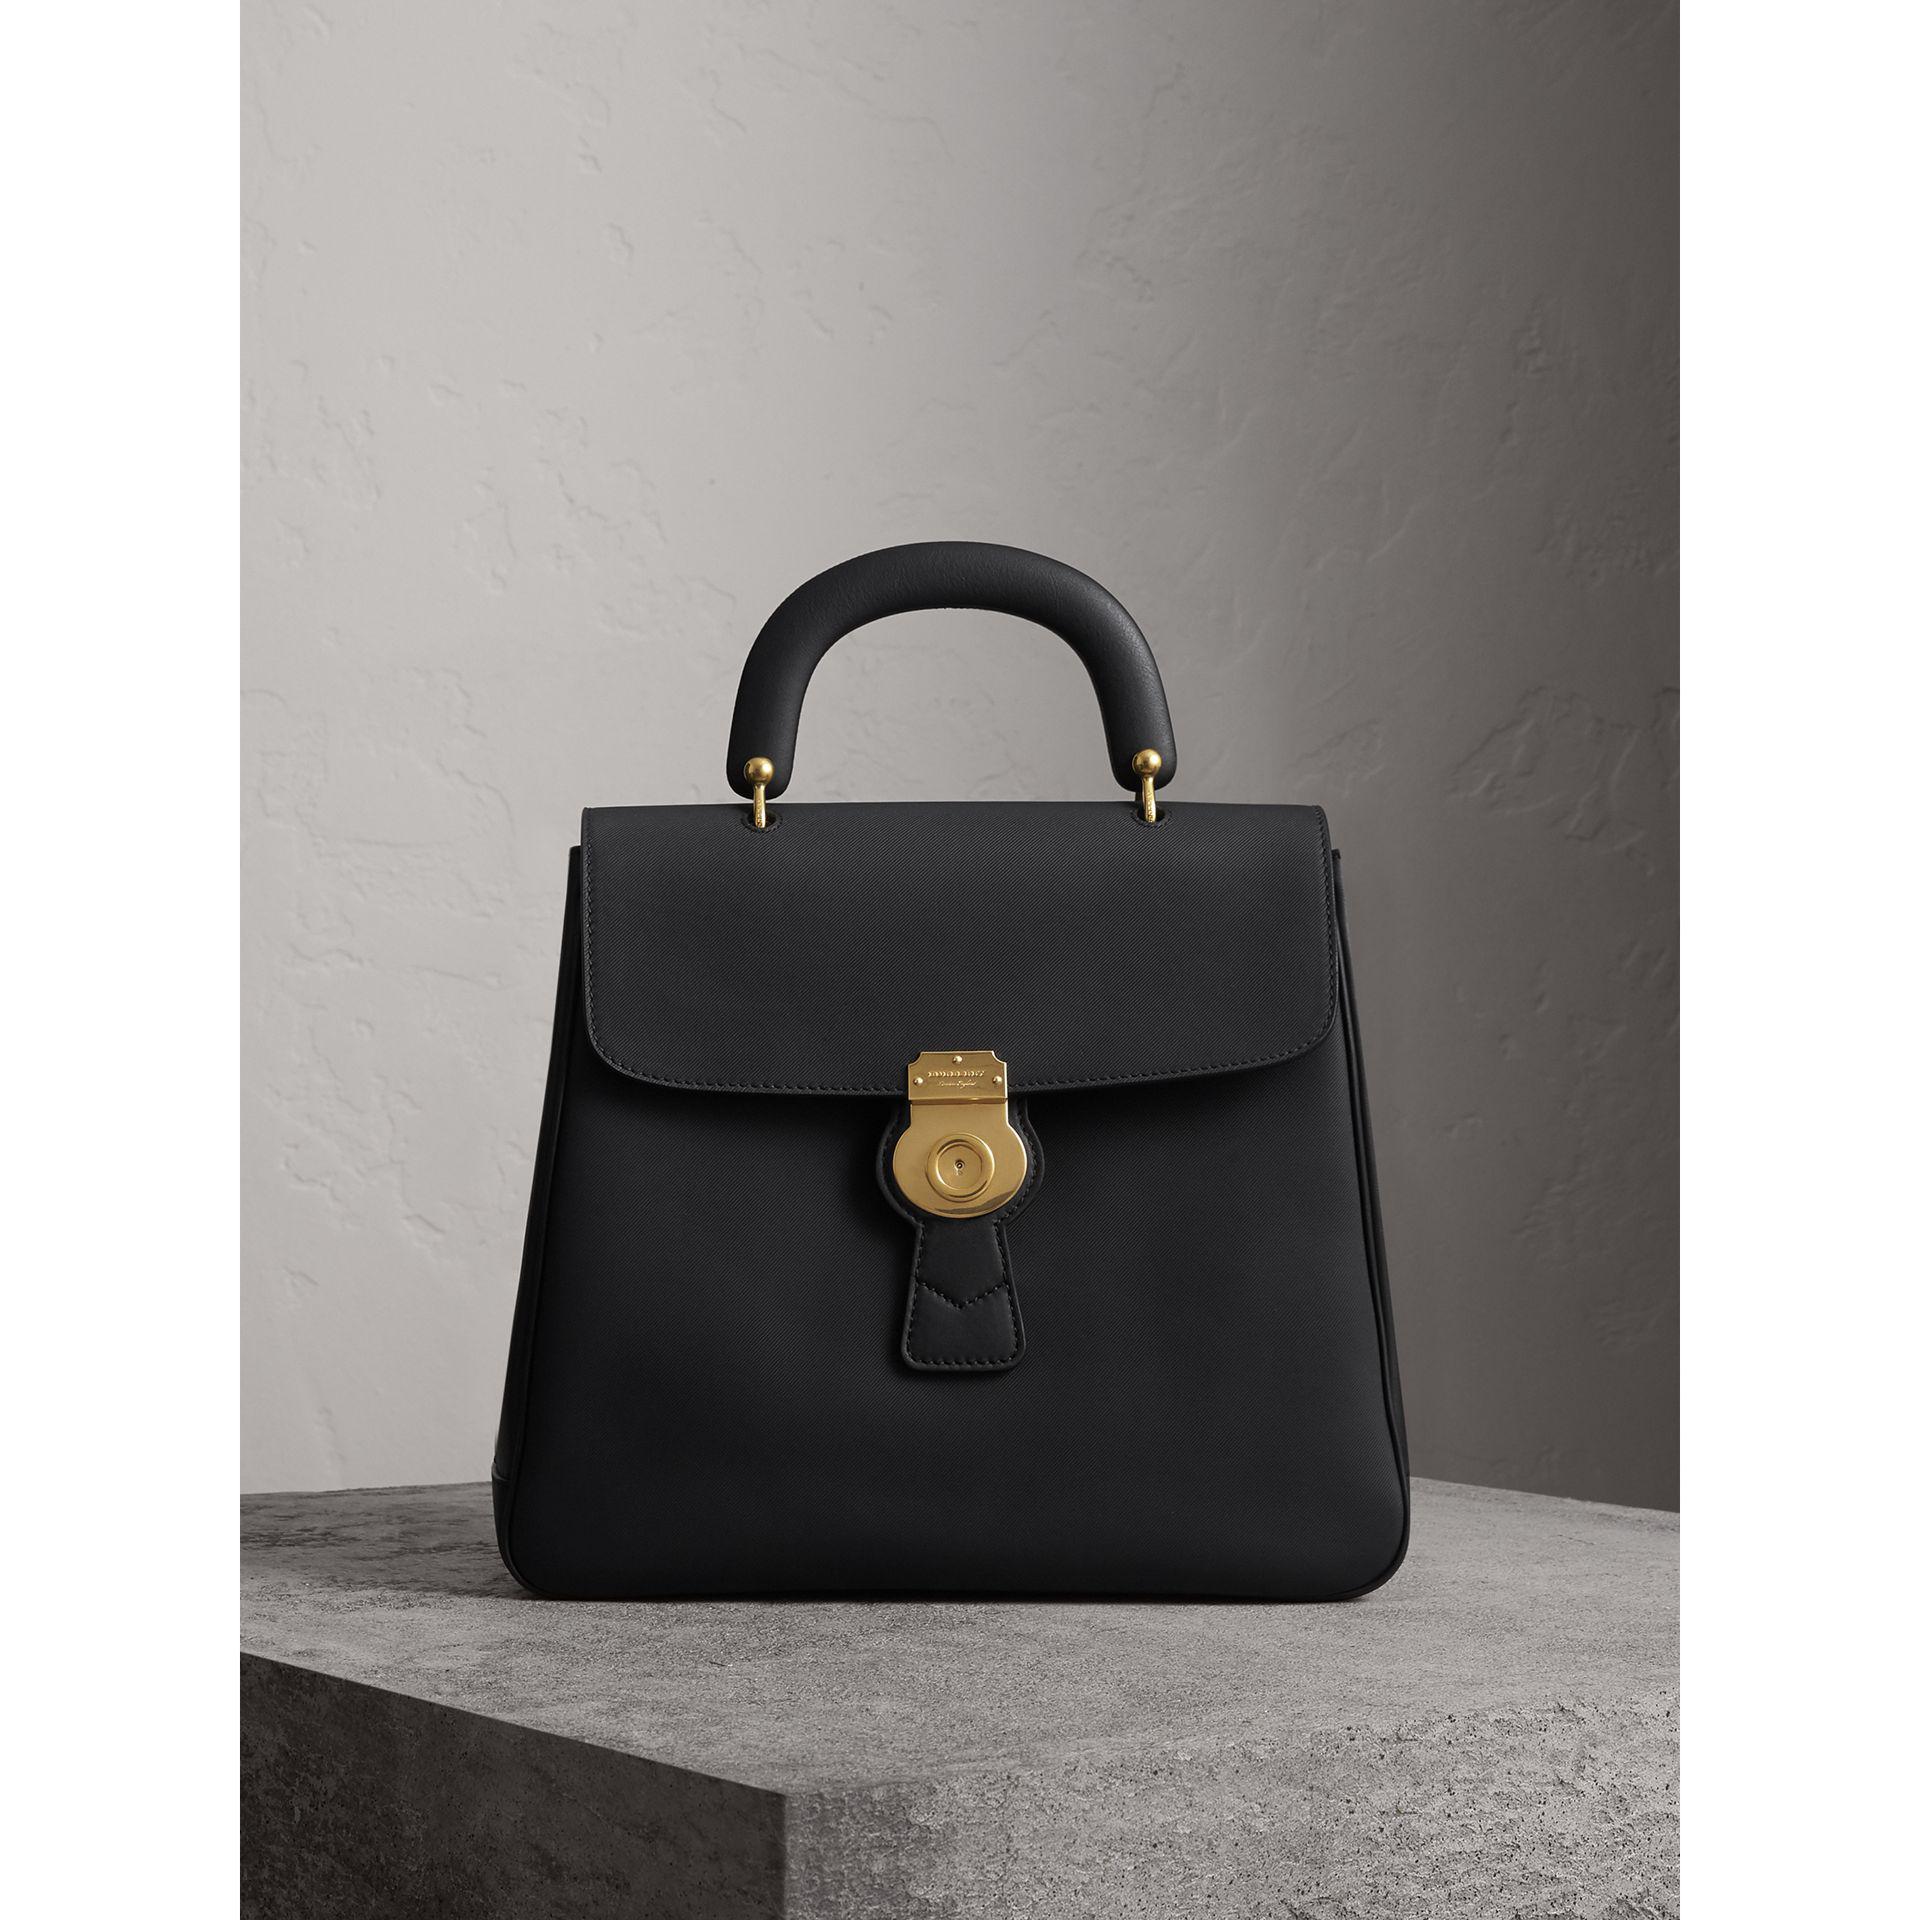 Burberry The Large Dk88 Top Handle Bag | Lyst UK